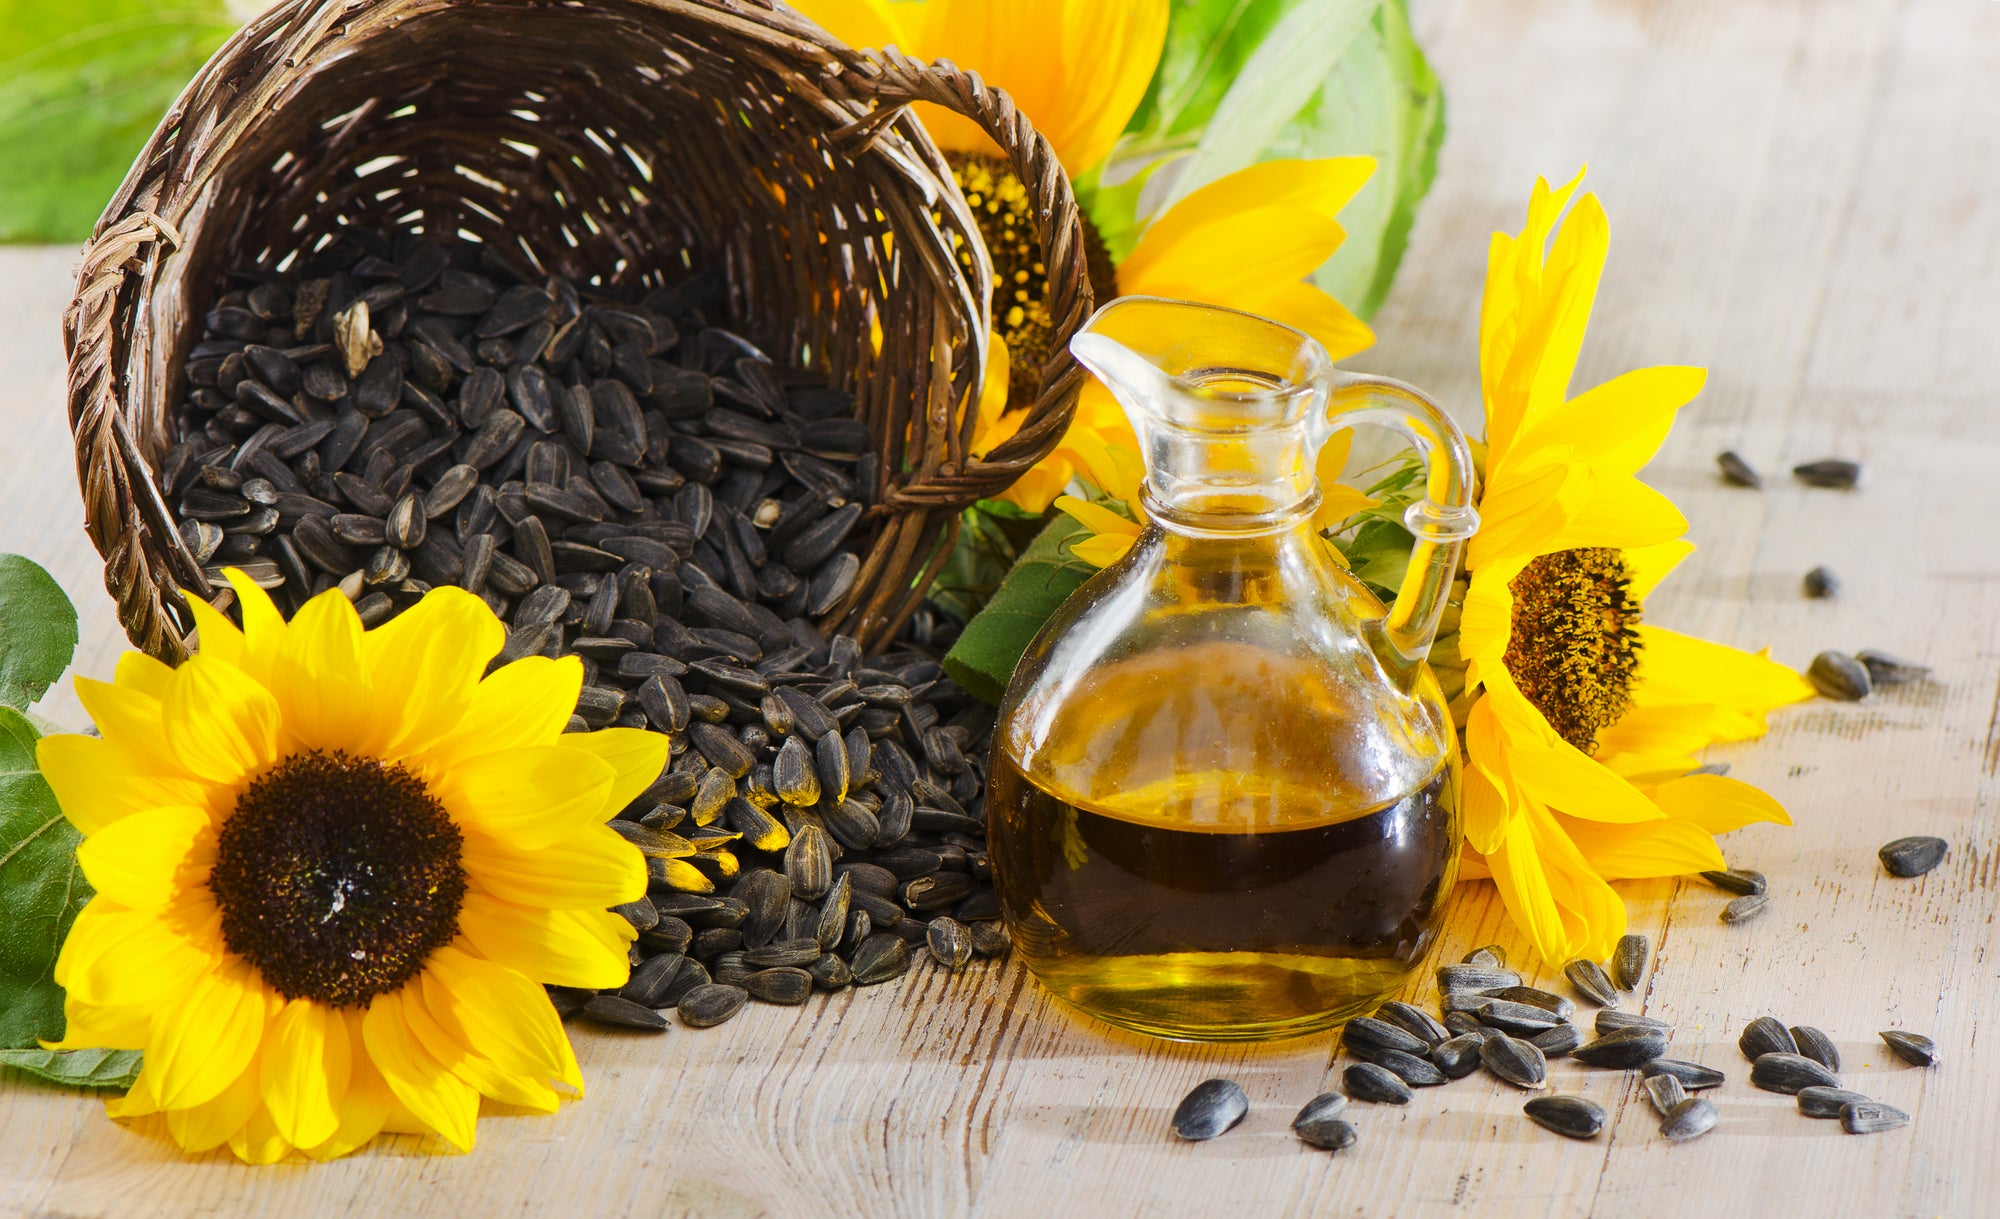 Best Oils for Beards: What are the Benefits of Using Sunflower Oil for Beard Care?